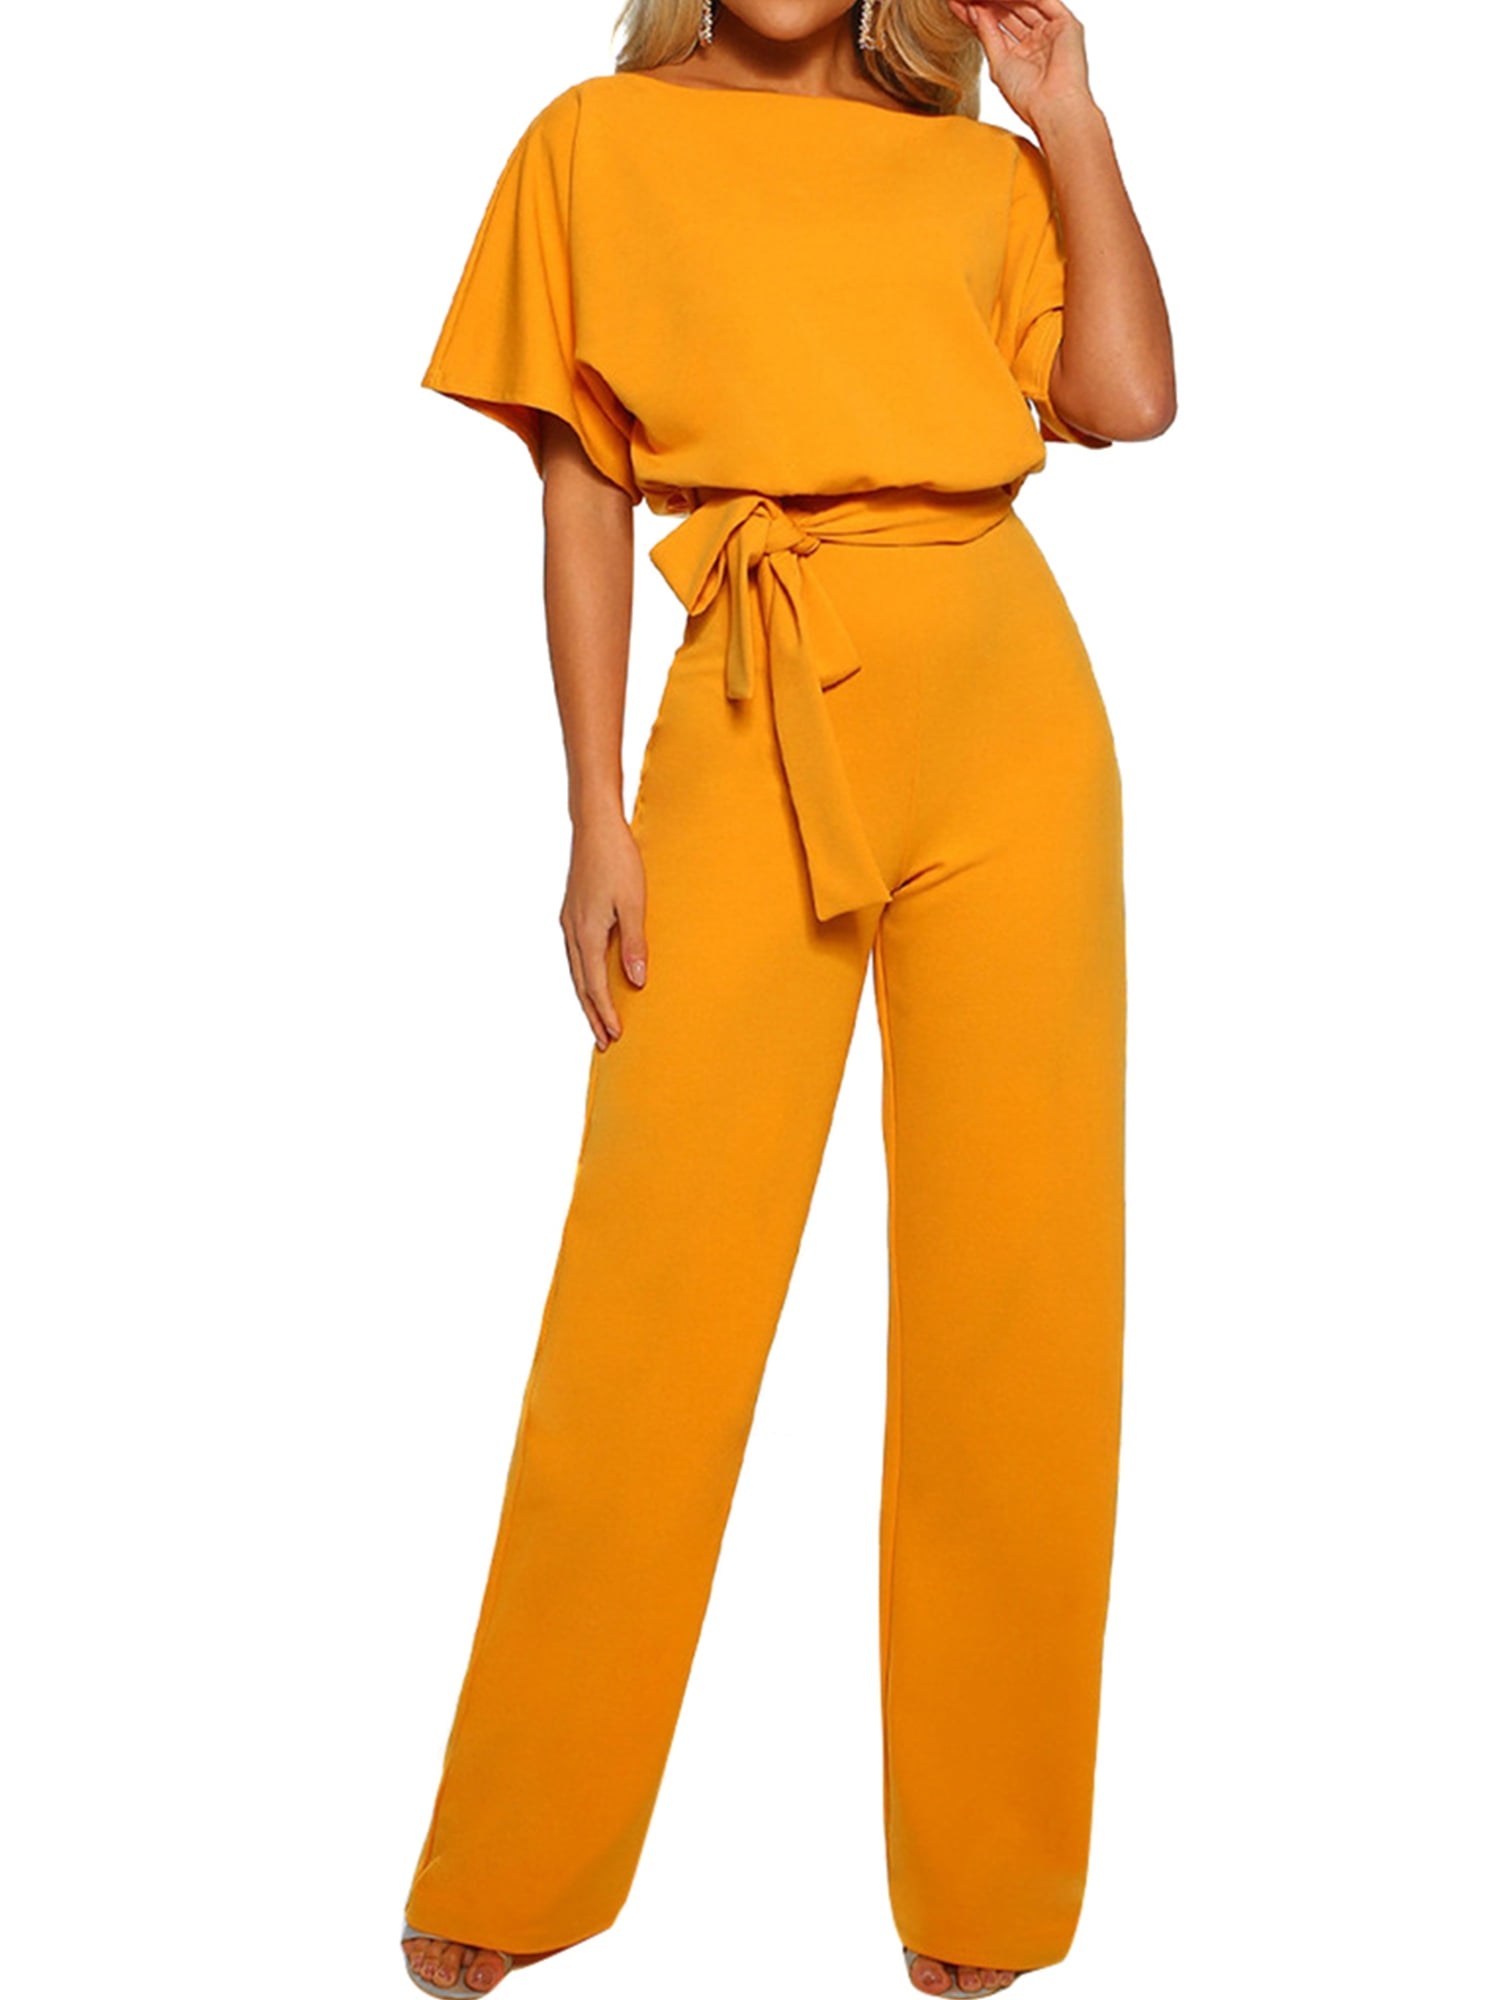 Beloved Womens Fashion Casual Short Sleeve Belted Overlay Jumpsuits Romper 